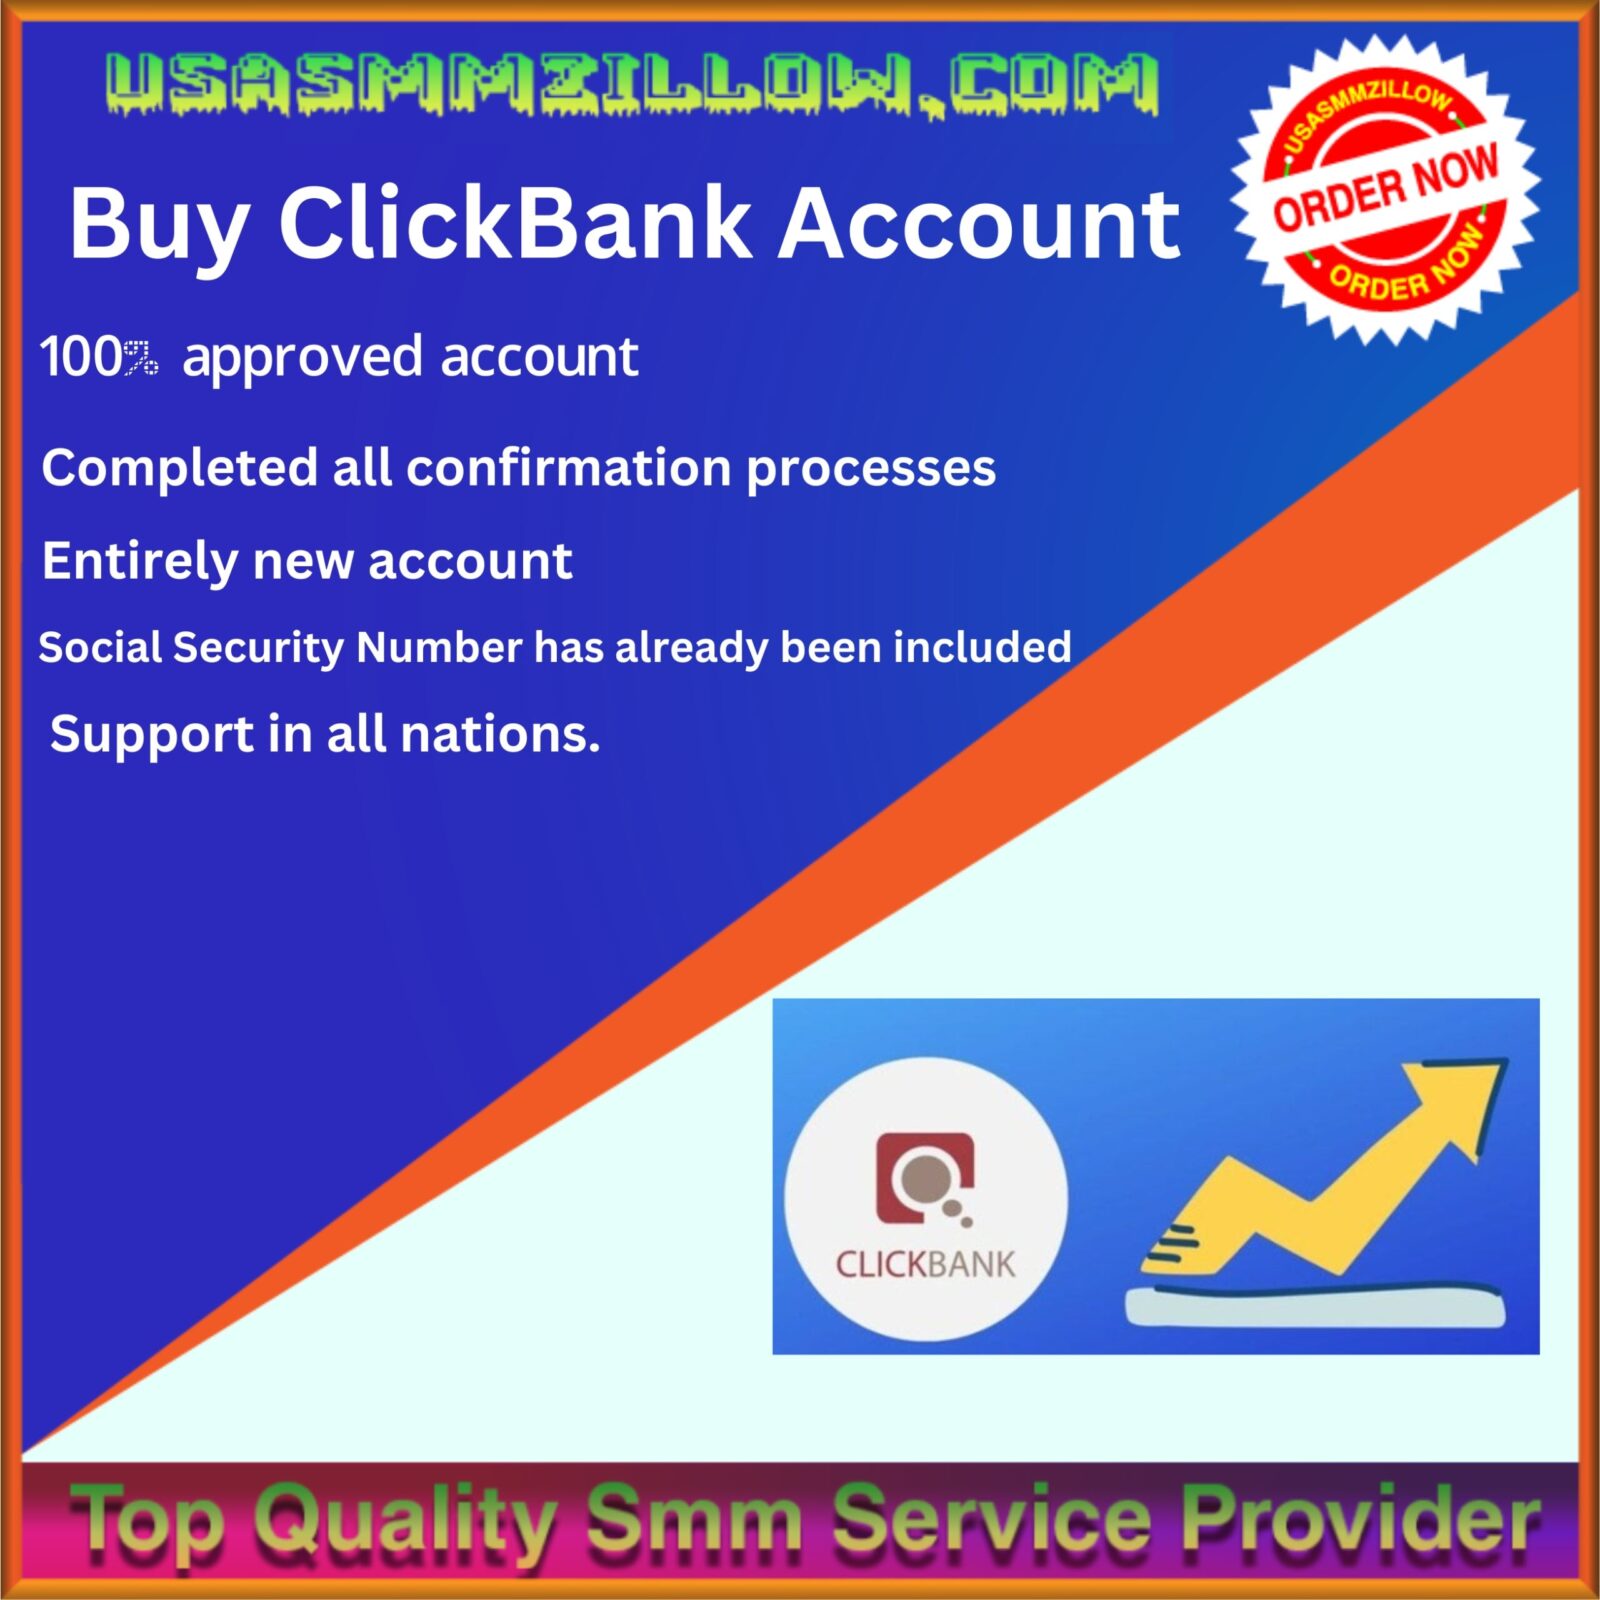 Buy ClickBank Account - 100% Verified With Document